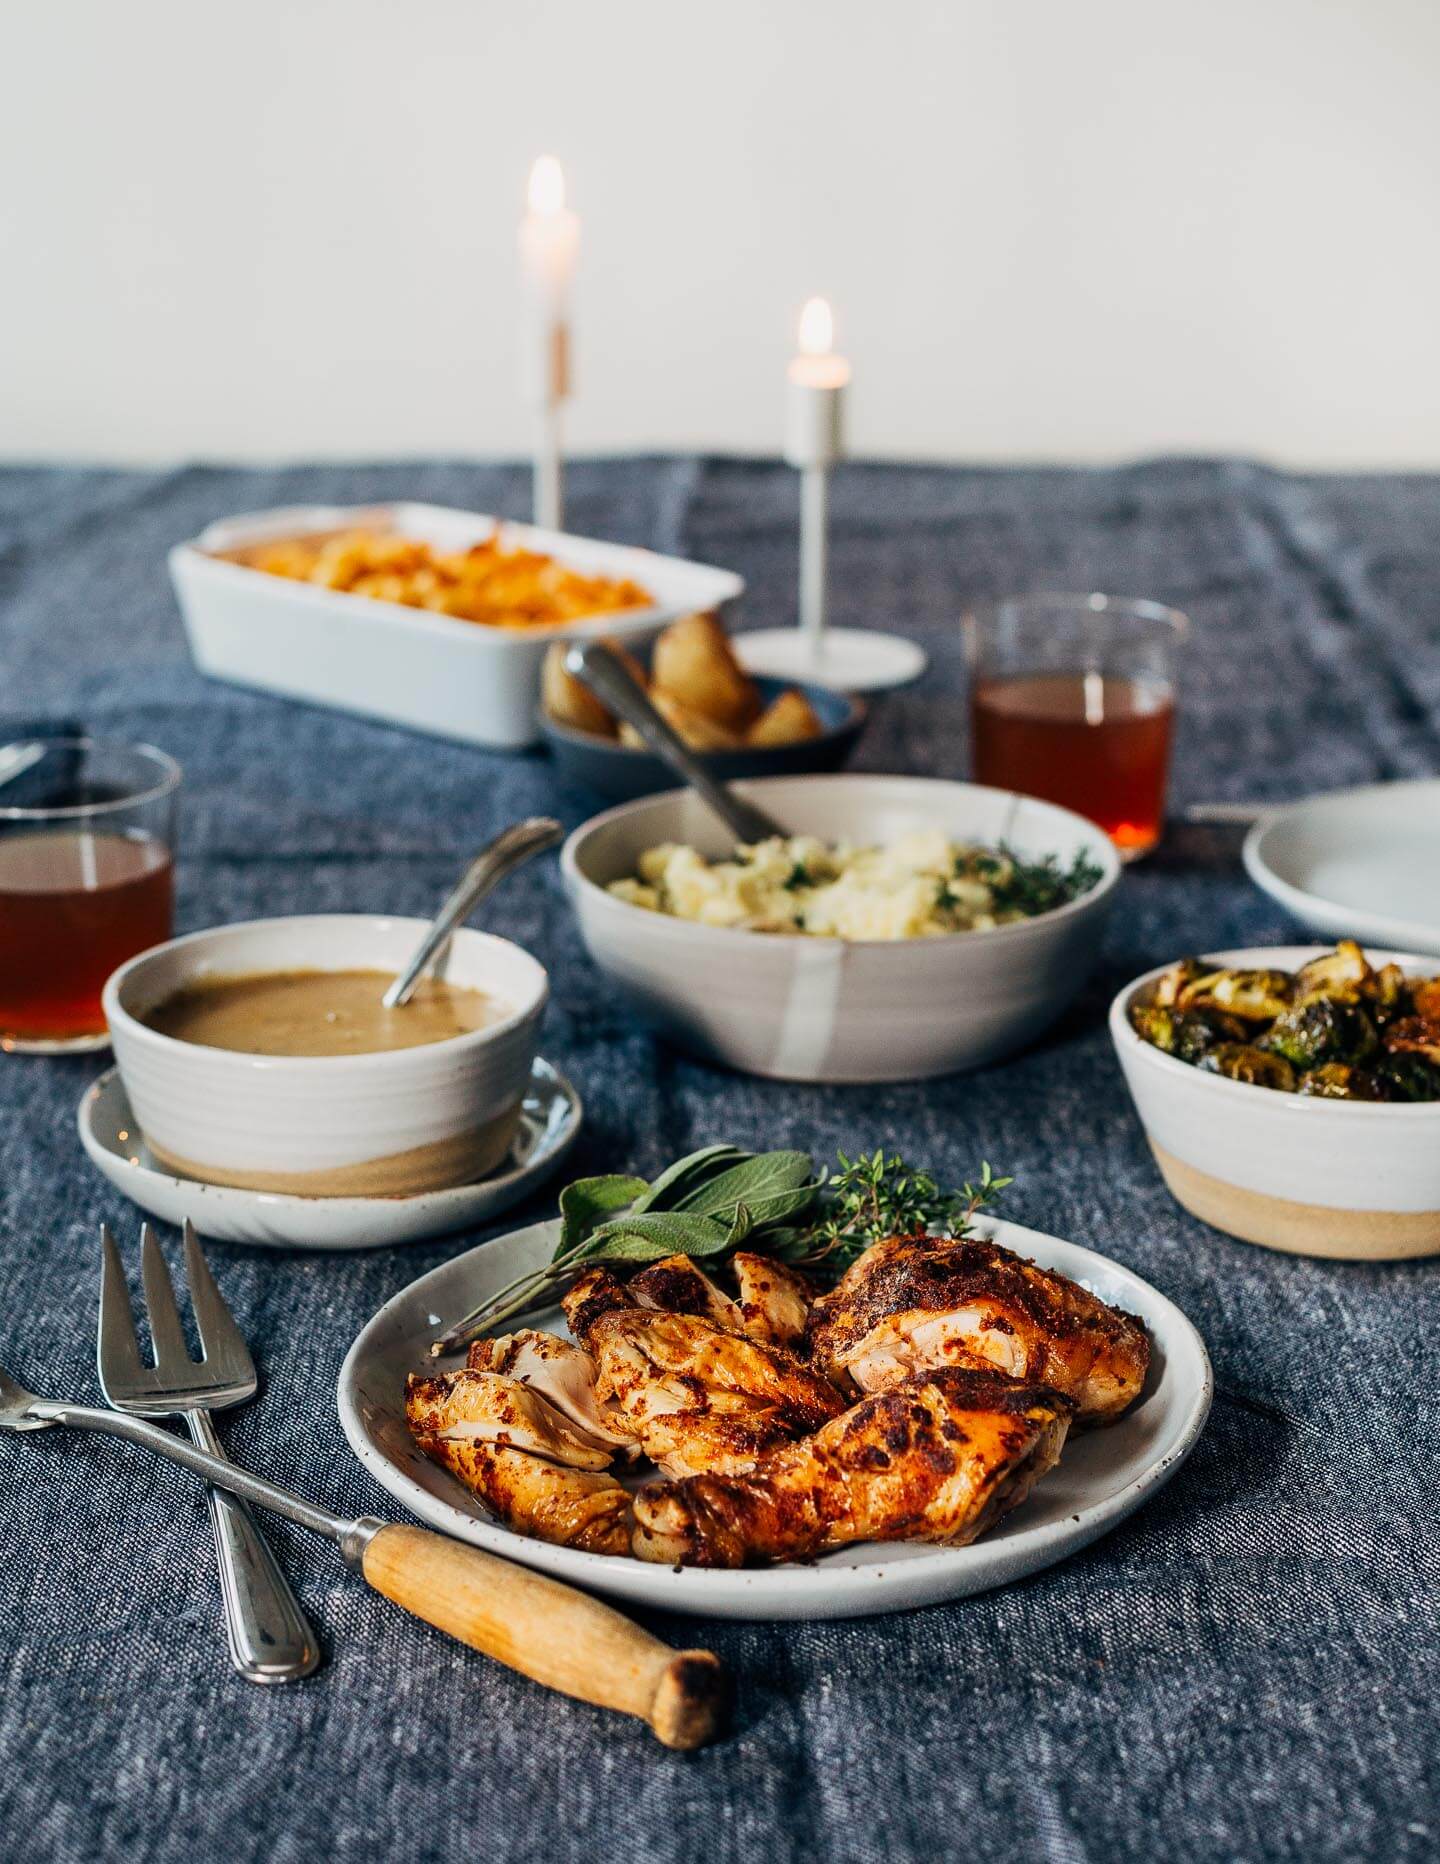 A Thanksgiving feast for two, featuring recipes for sheet pan half chicken with roasted Brussels sprouts and onions, and a simple gravy made with the pan drippings. Serve with mashed potatoes and mac and cheese, and you have the perfect Thanksgiving for two (with plenty of leftovers!).